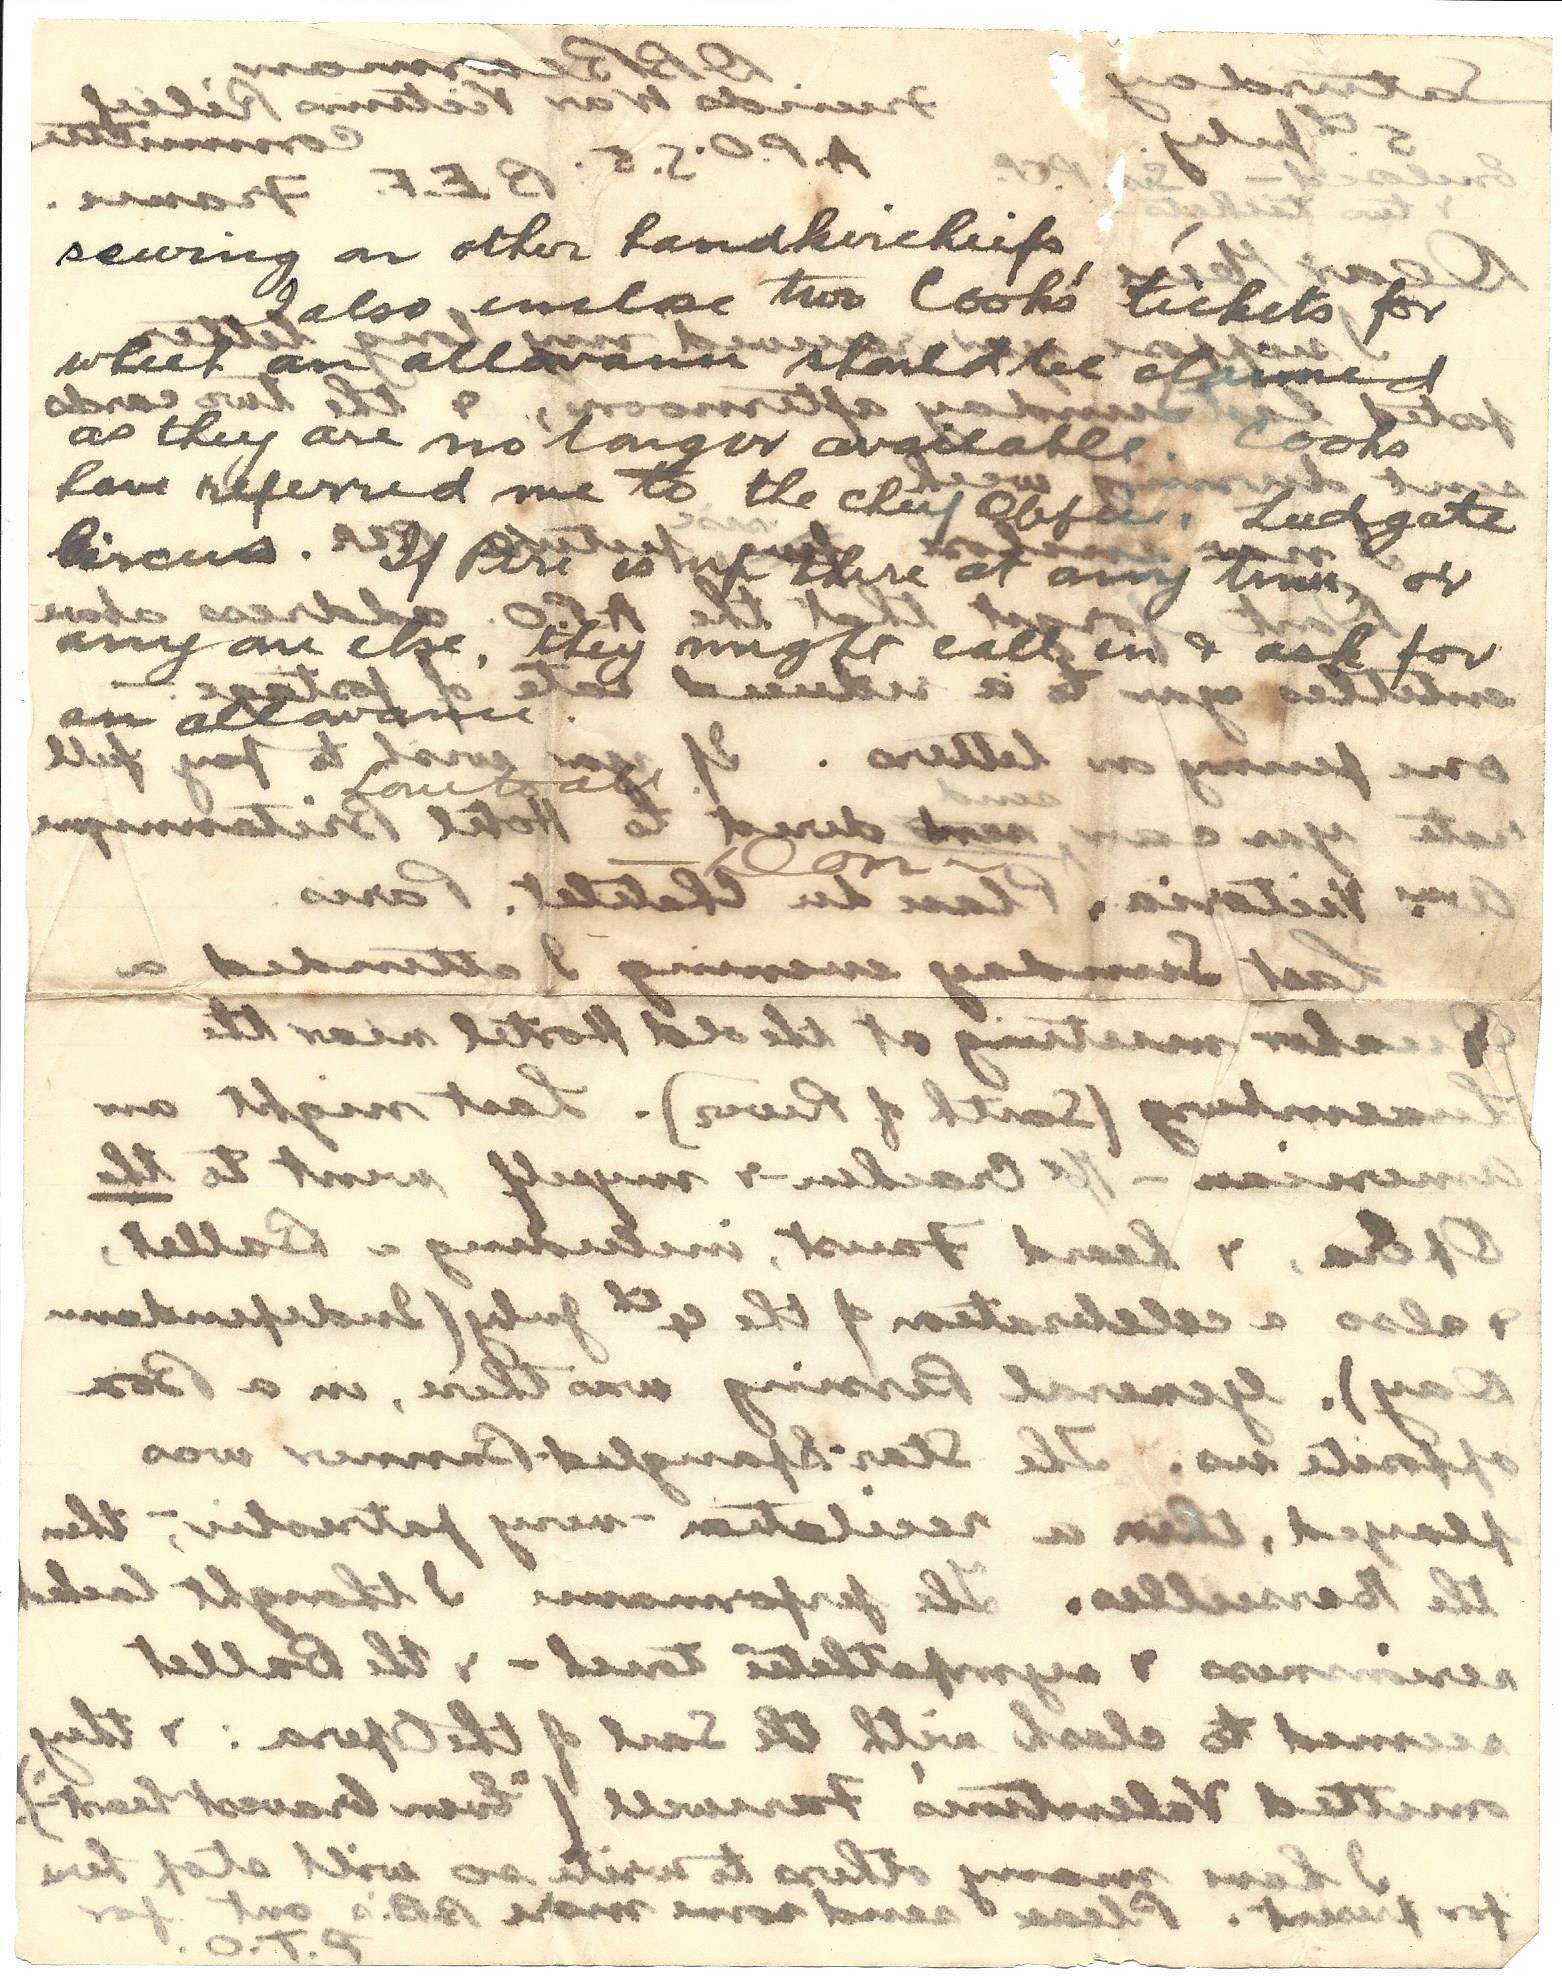 1919-07-05 p2 Donald Bearman letter to his father